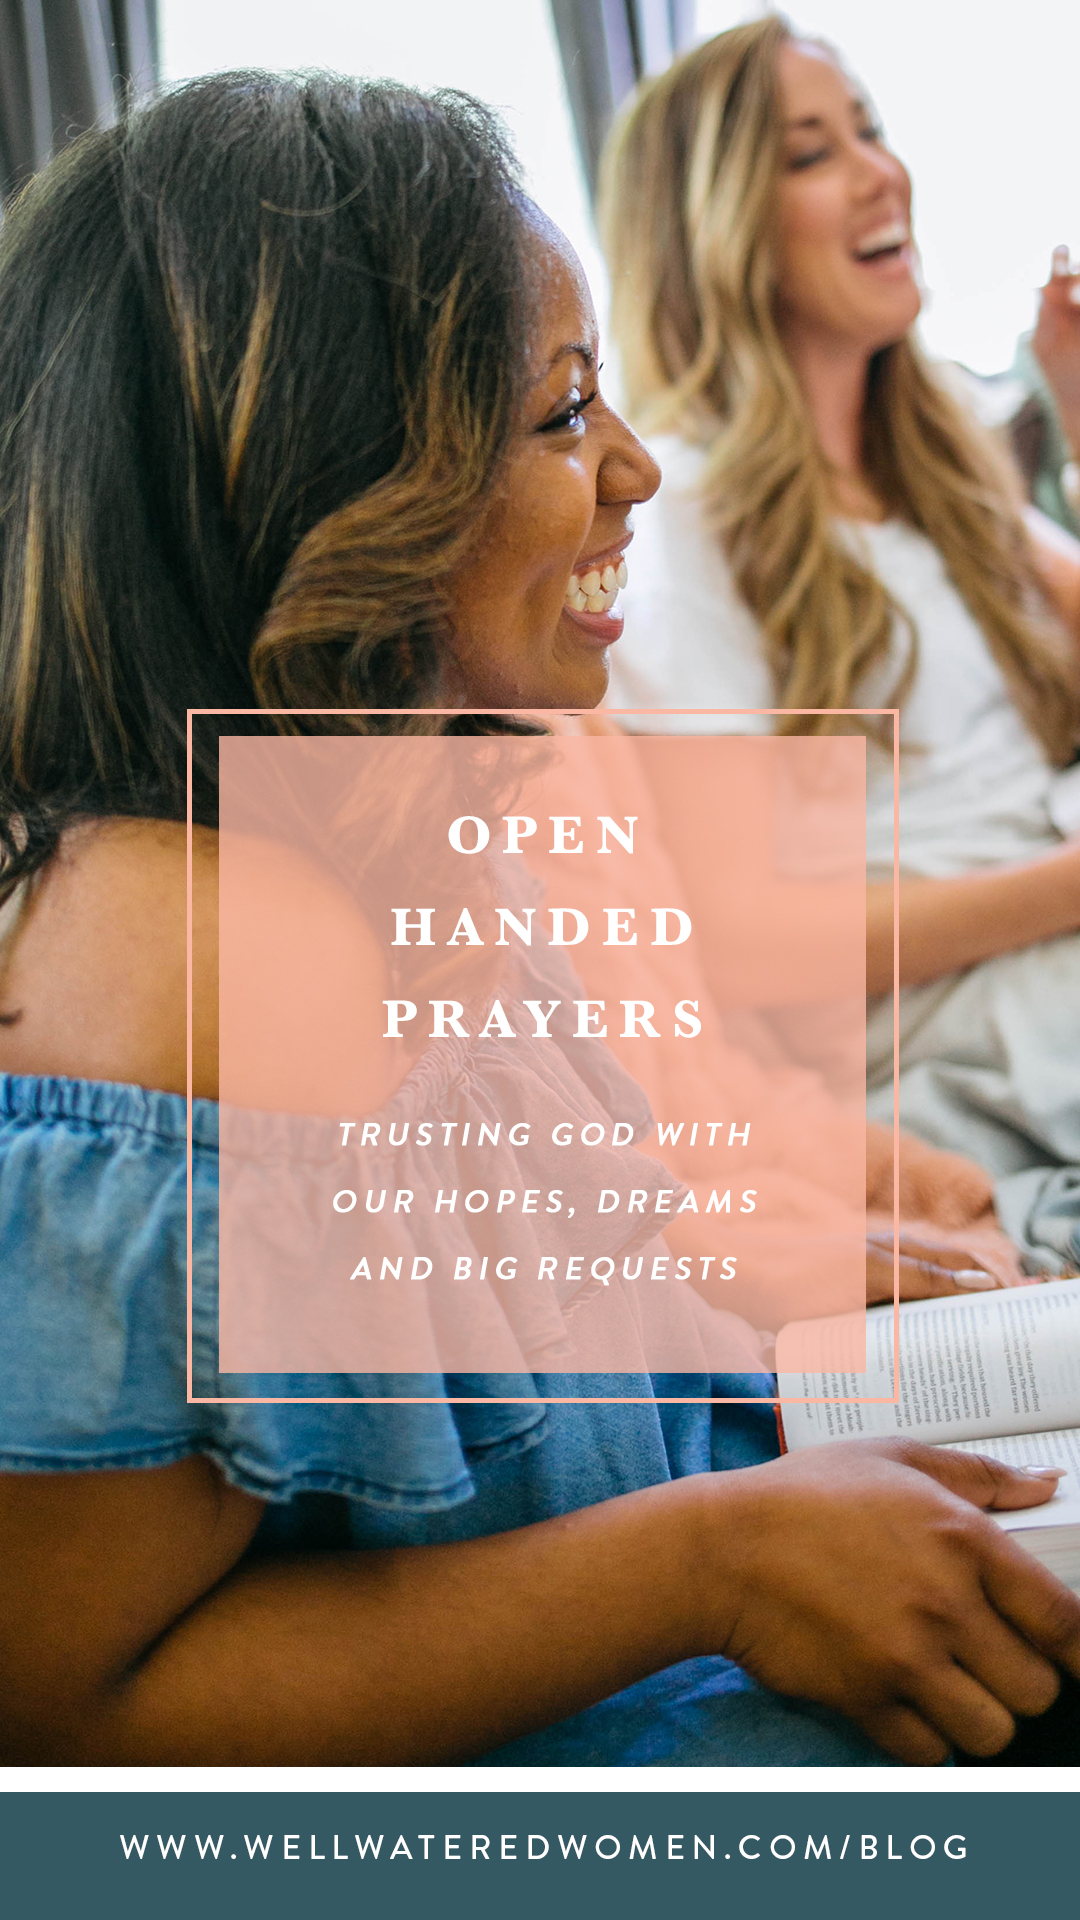 Open Handed Prayer: Trusting God wiht our hopes, dreams, and big requests - Well-Watered Women blog on praying